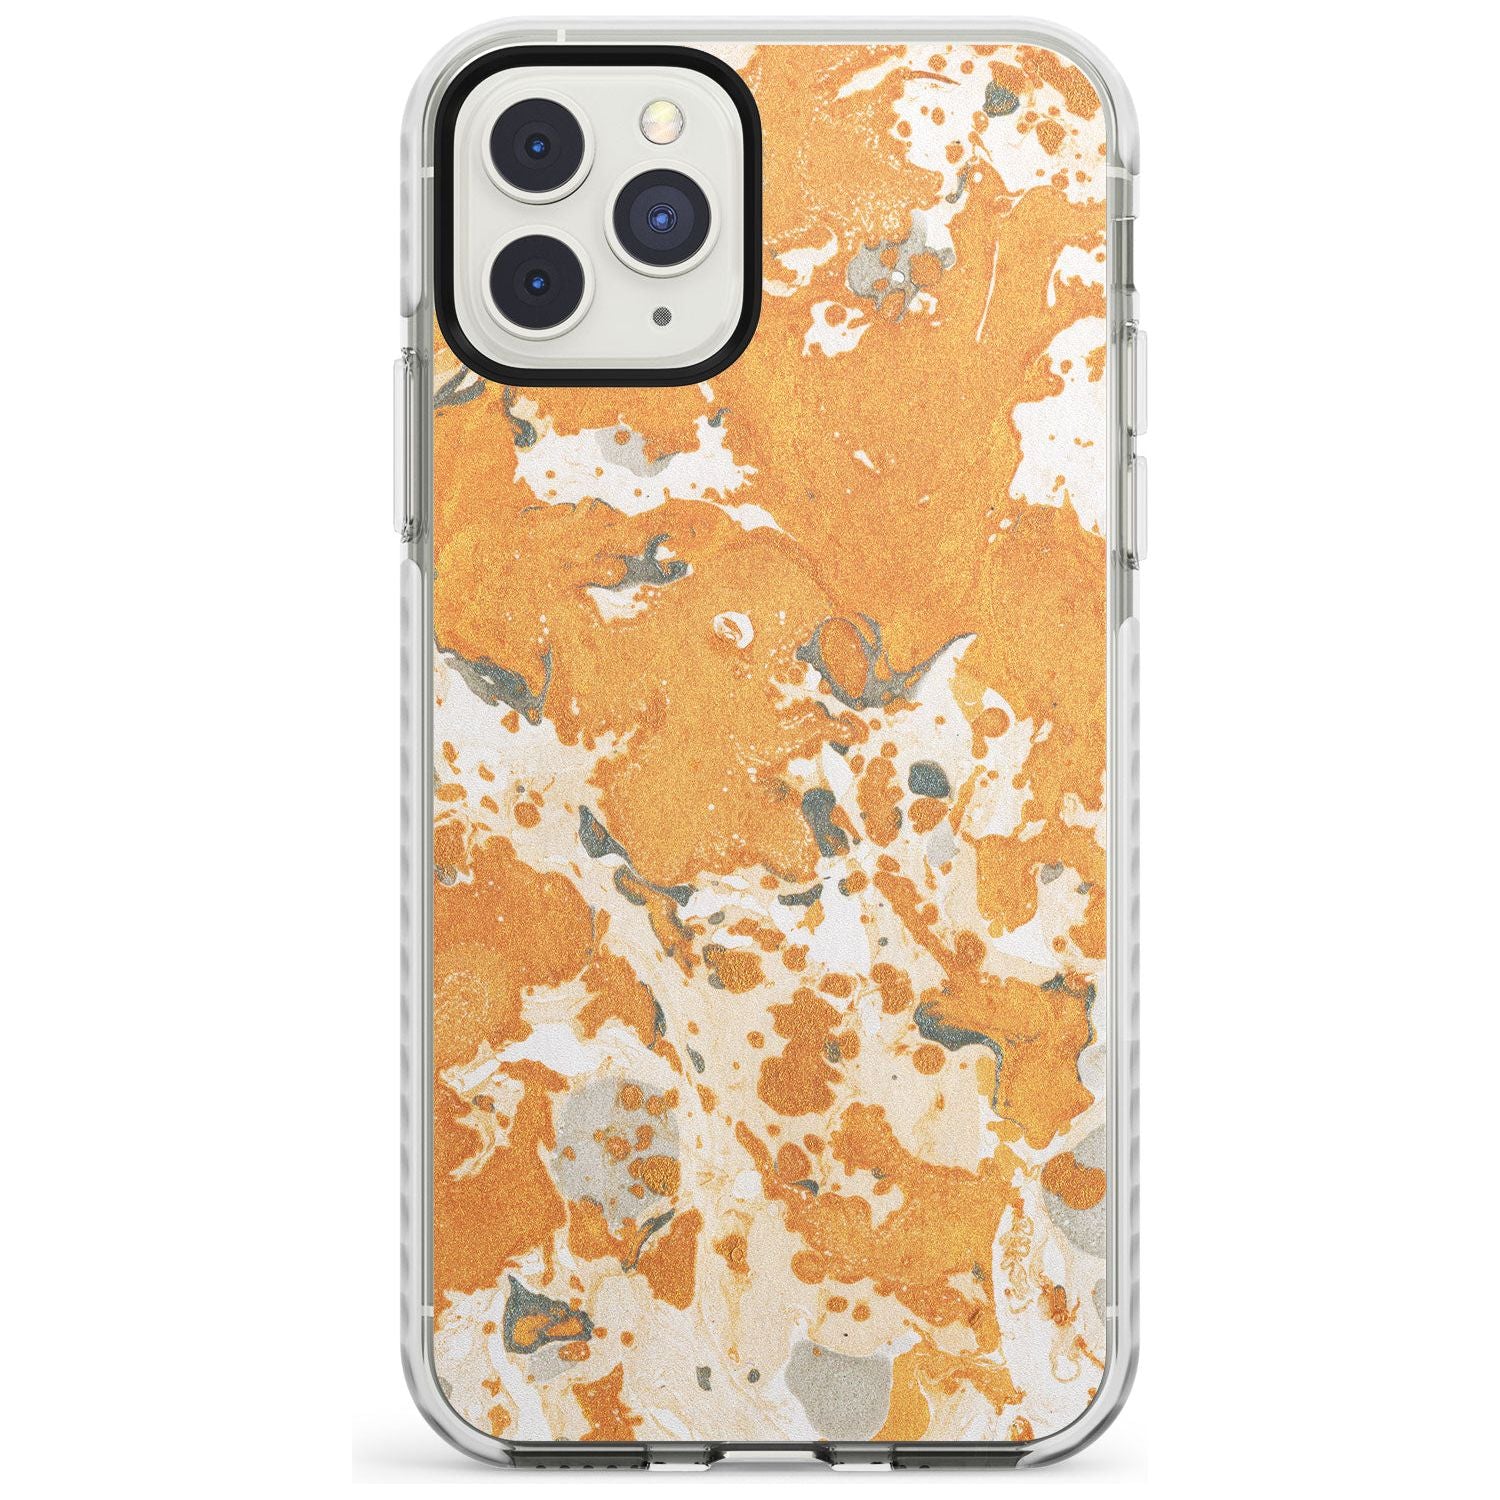 Orange Marbled Paper Pattern Impact Phone Case for iPhone 11 Pro Max